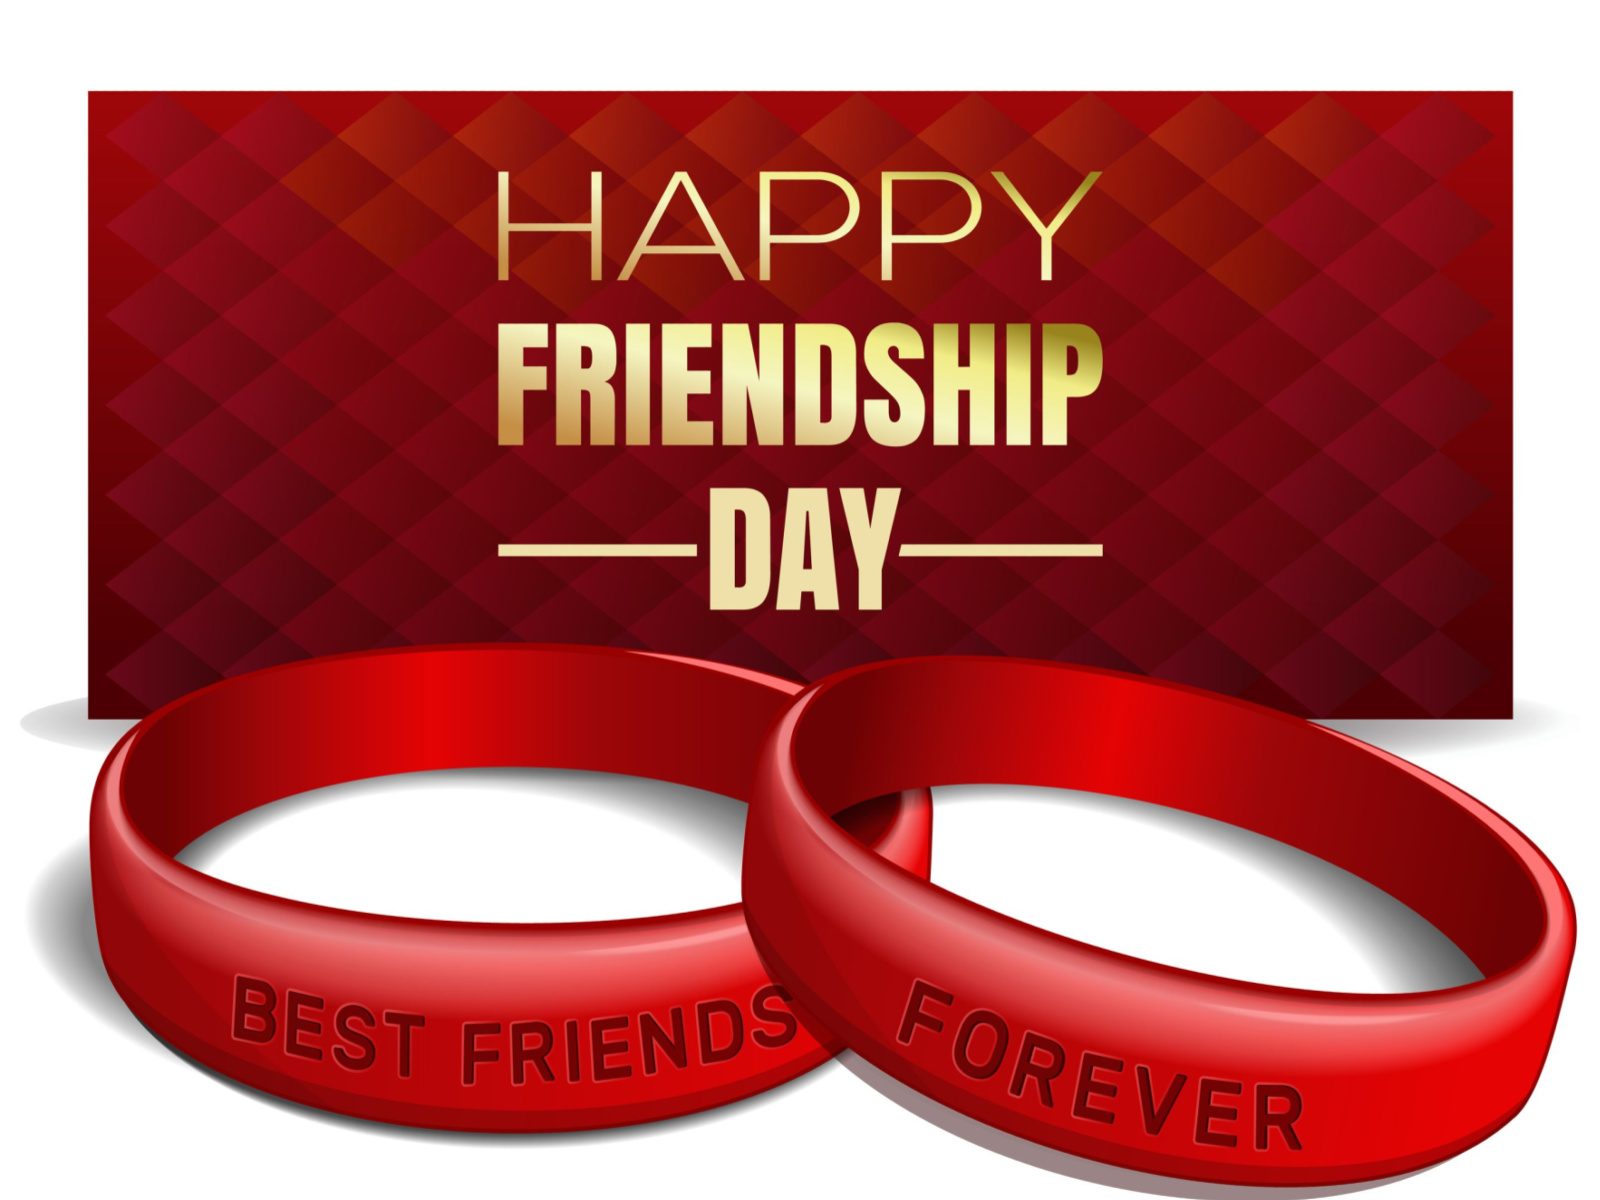 Happy Friendship Day 2022: Wishes, Images, Greetings, Quotes, Messages and  WhatsApp Greetings to Share With Your Buddy